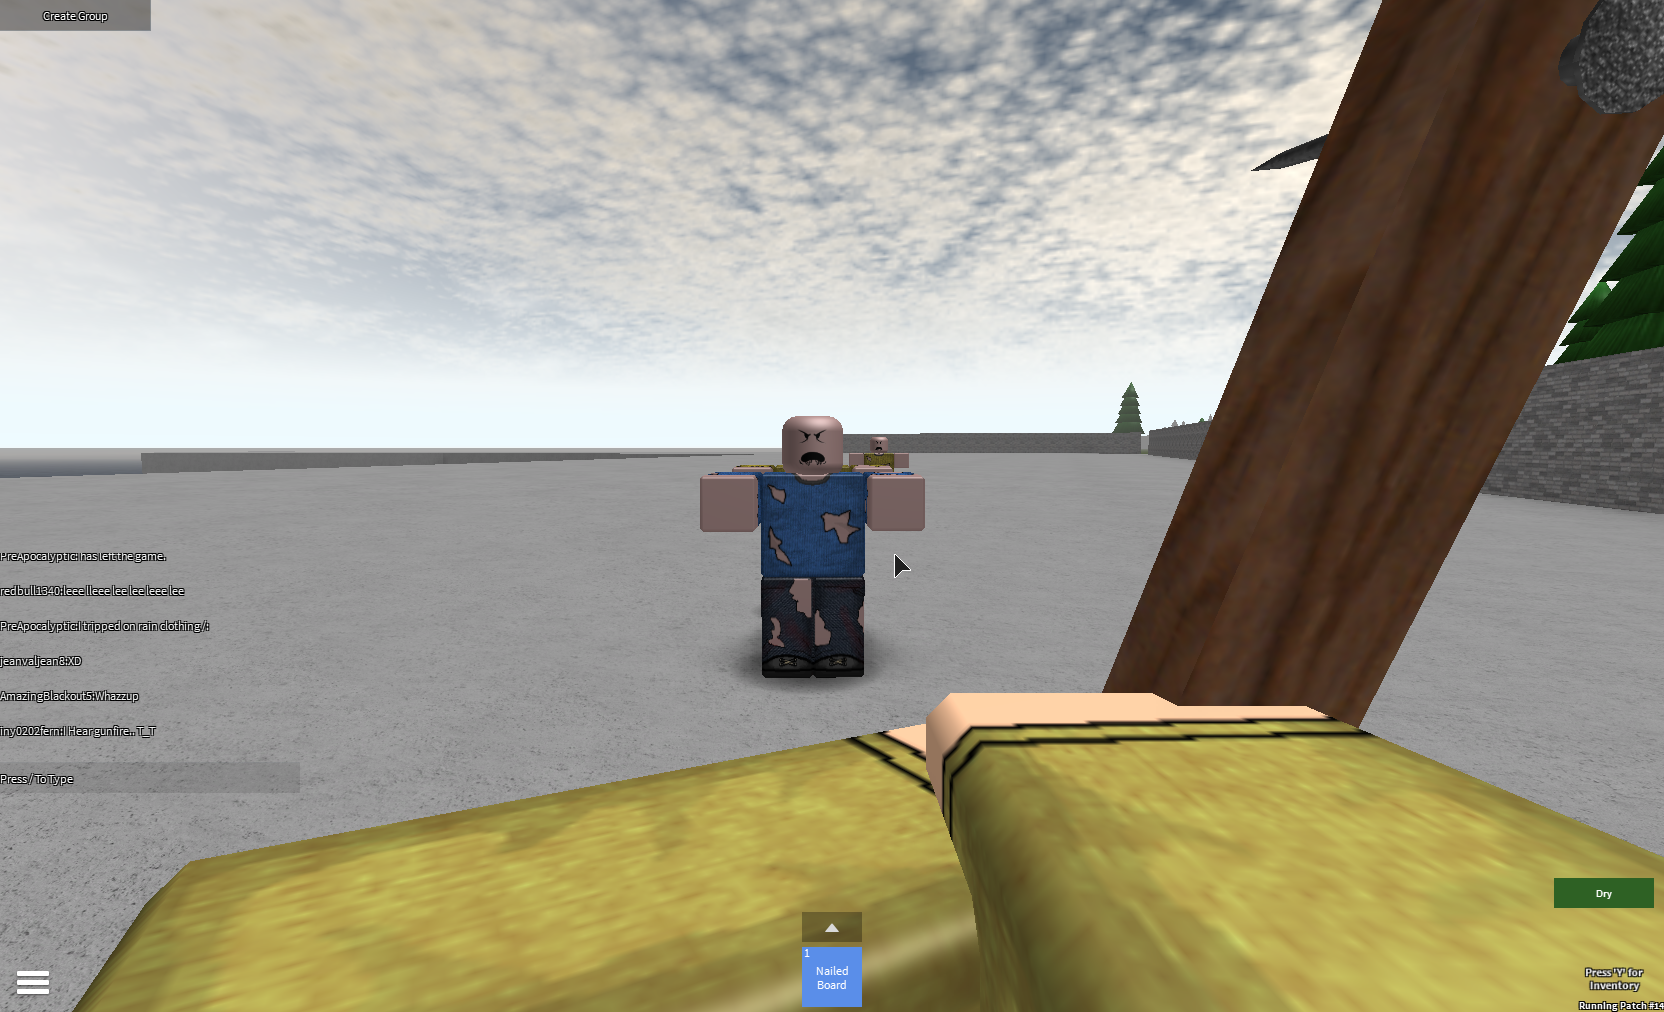 Zombies Roblox Dead Mist Wiki Fandom Powered By Wikia - robloxscreenshot02152015 063455515 zombies chasing a player